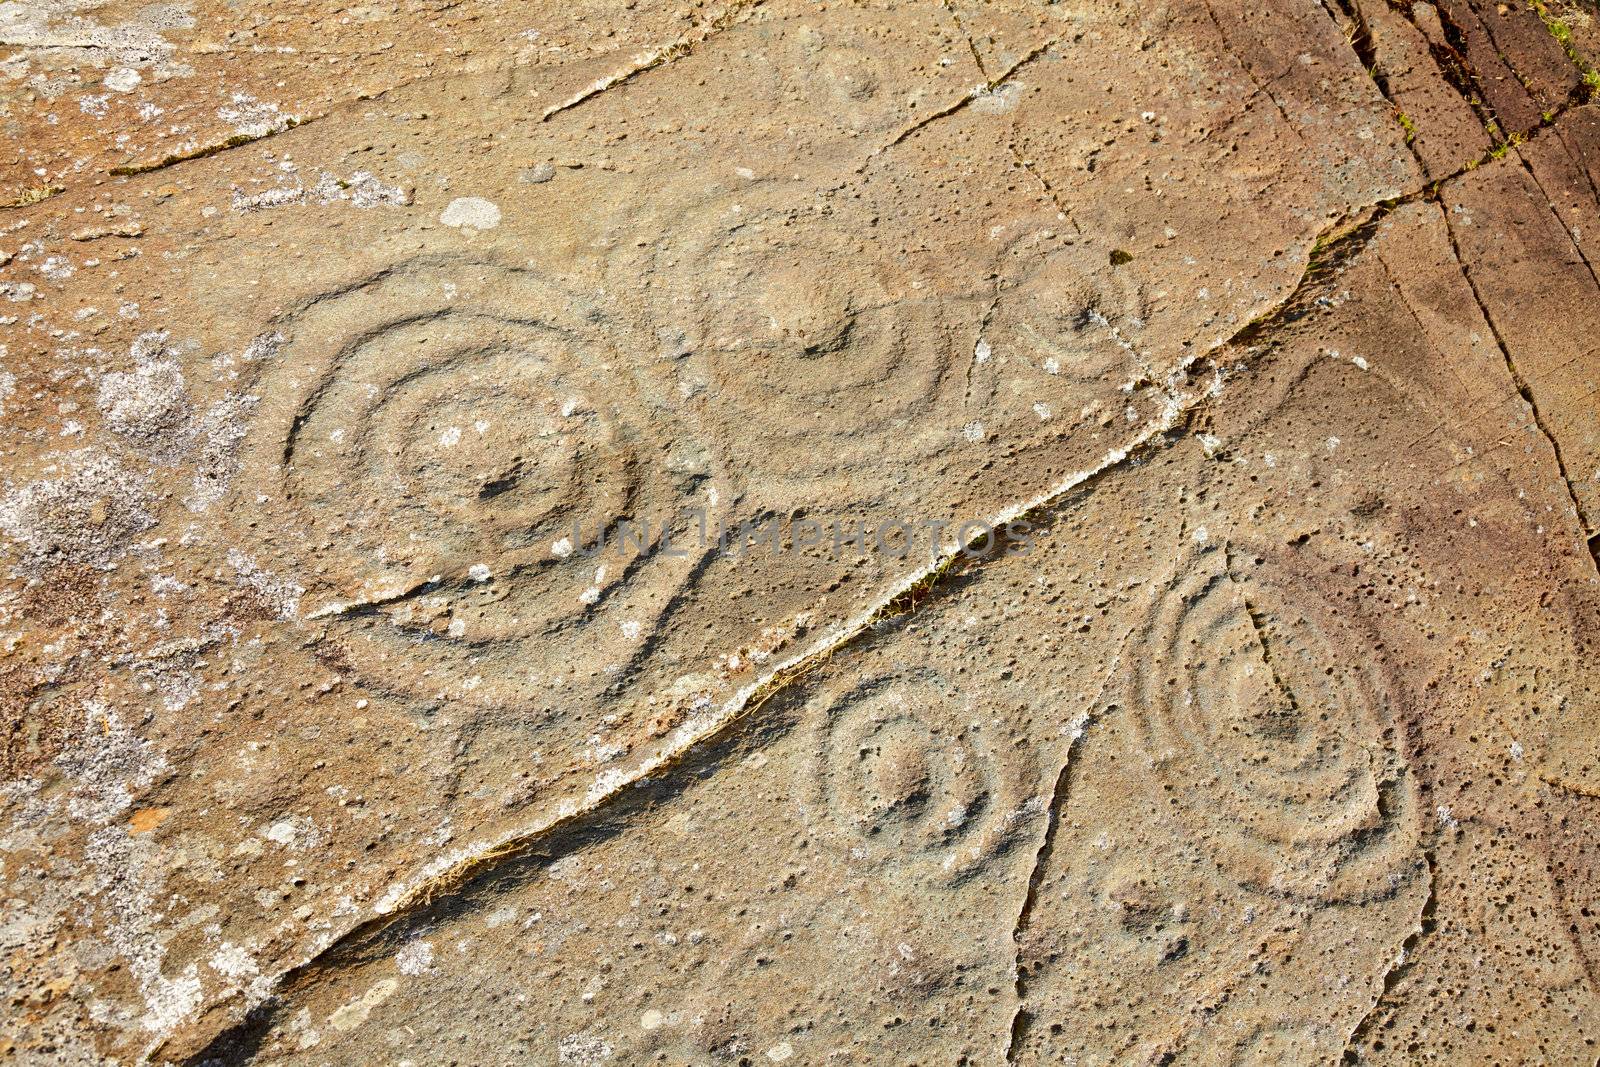 Cup and ring marks on a stone near Cairnbaan in Scotland